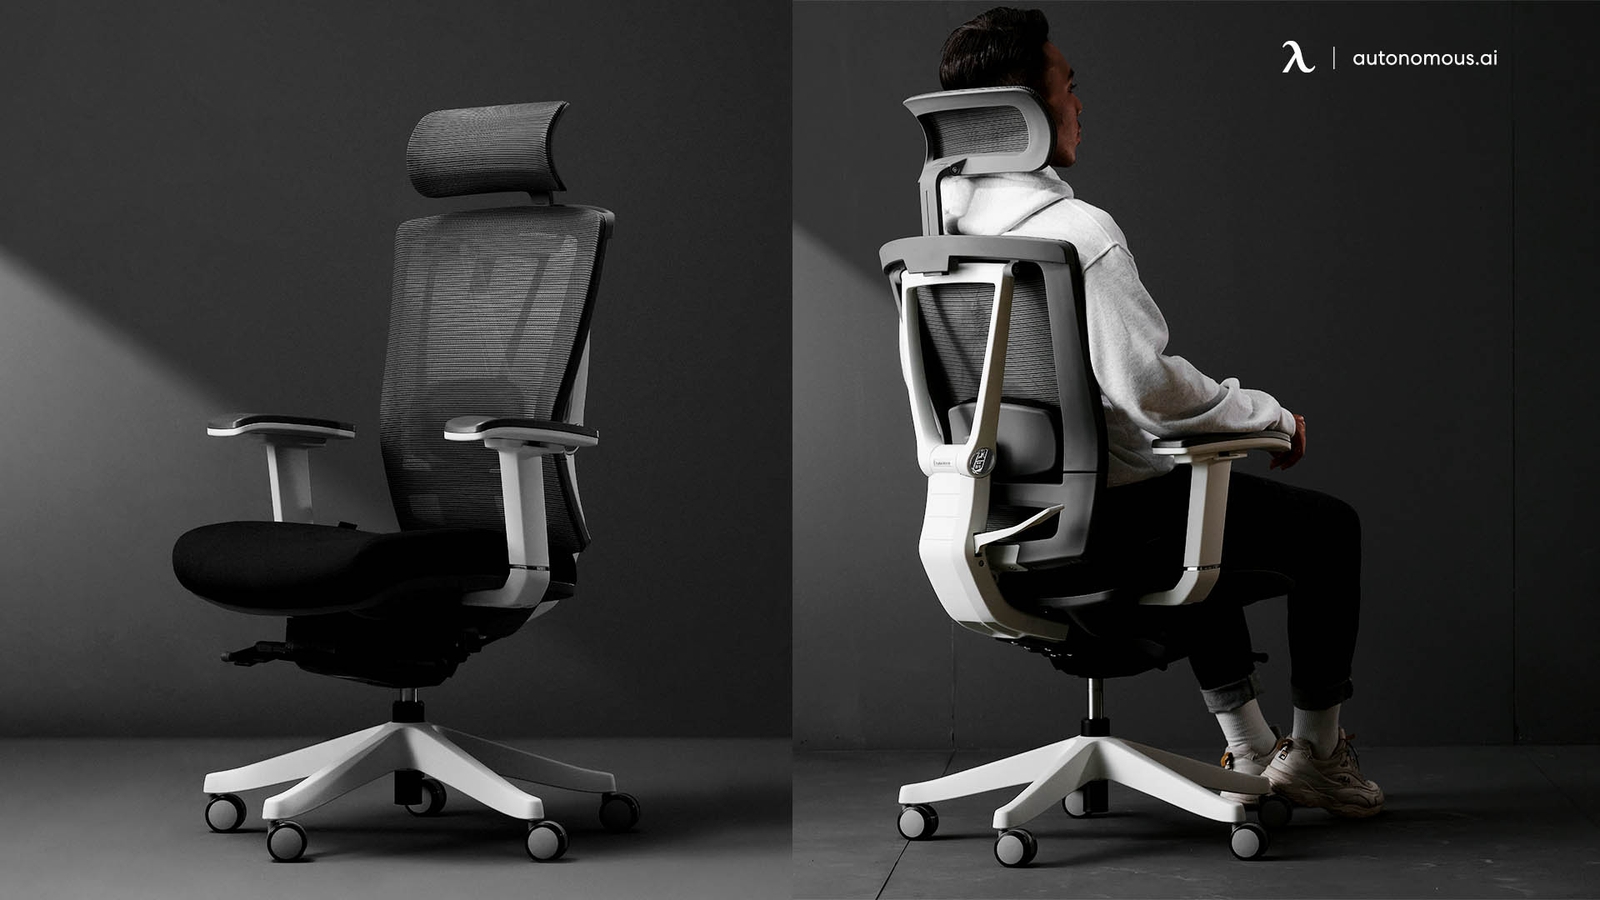 Affordable Ergonomic Chair: Pros & Cons You Should Know